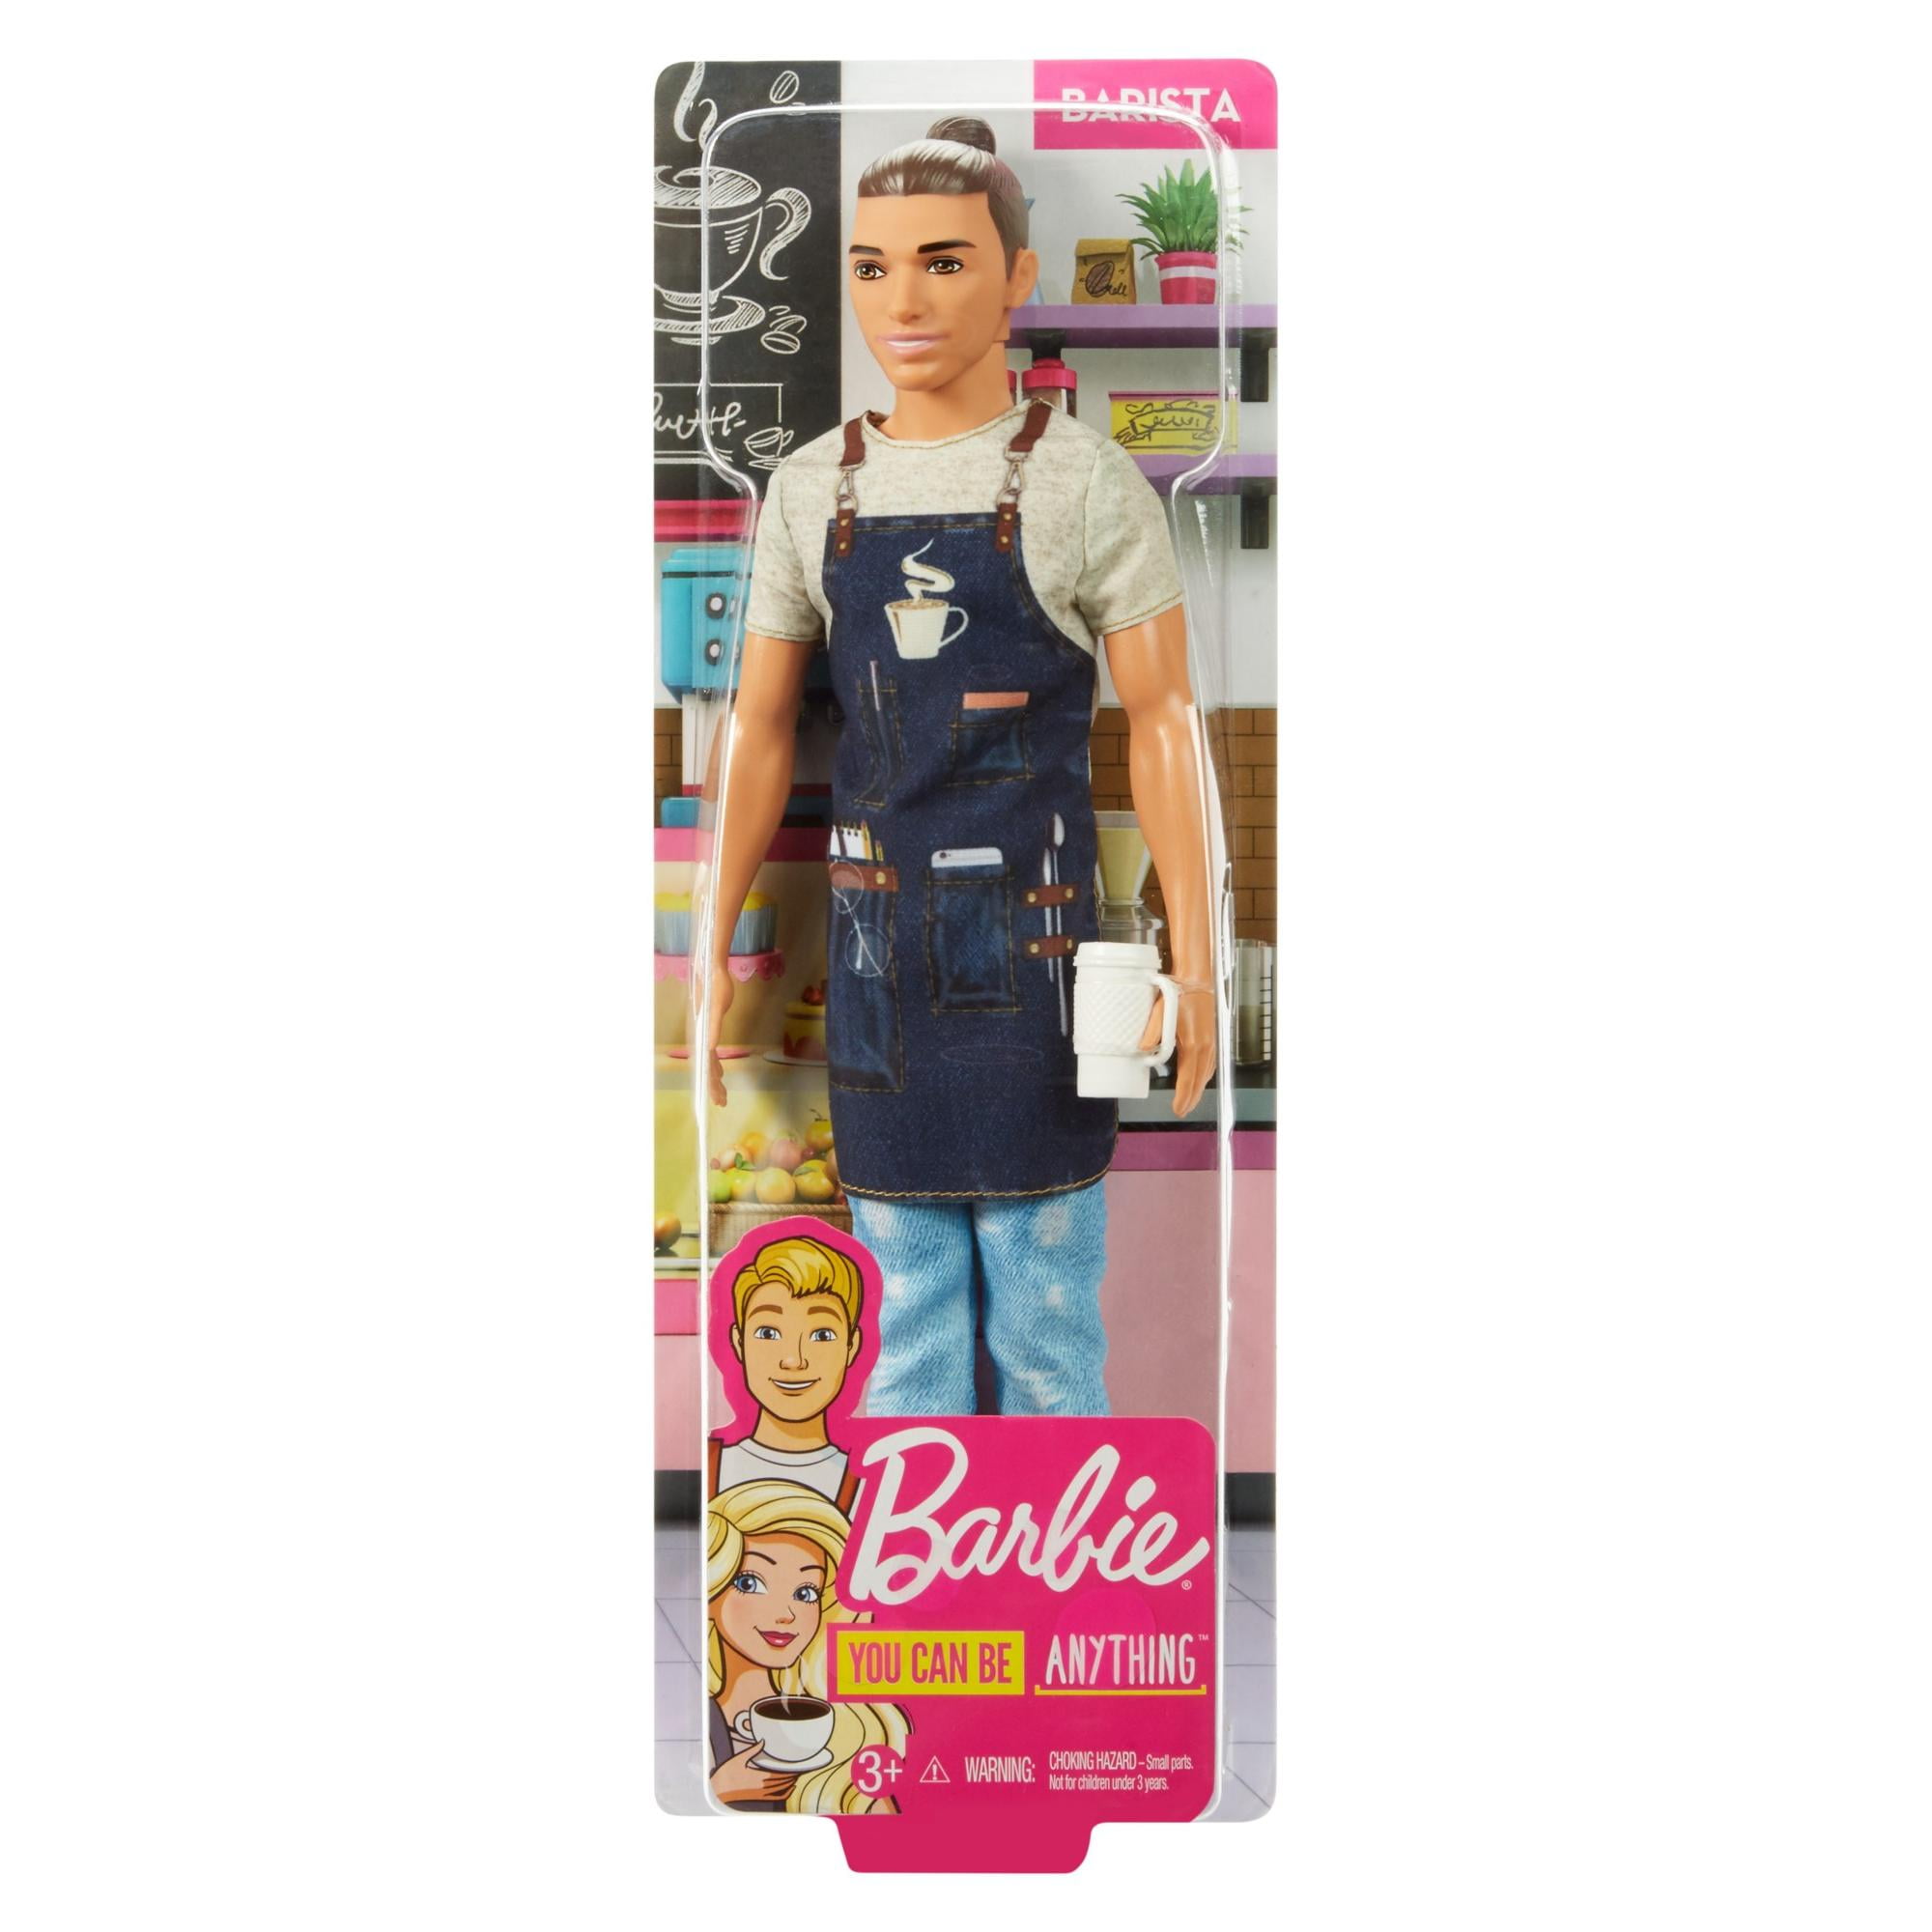 BARBIE YOU CAN BE ANYTHING BARBIE DOLL BARISTA OUTFIT & 2 COFFEE CUPS 